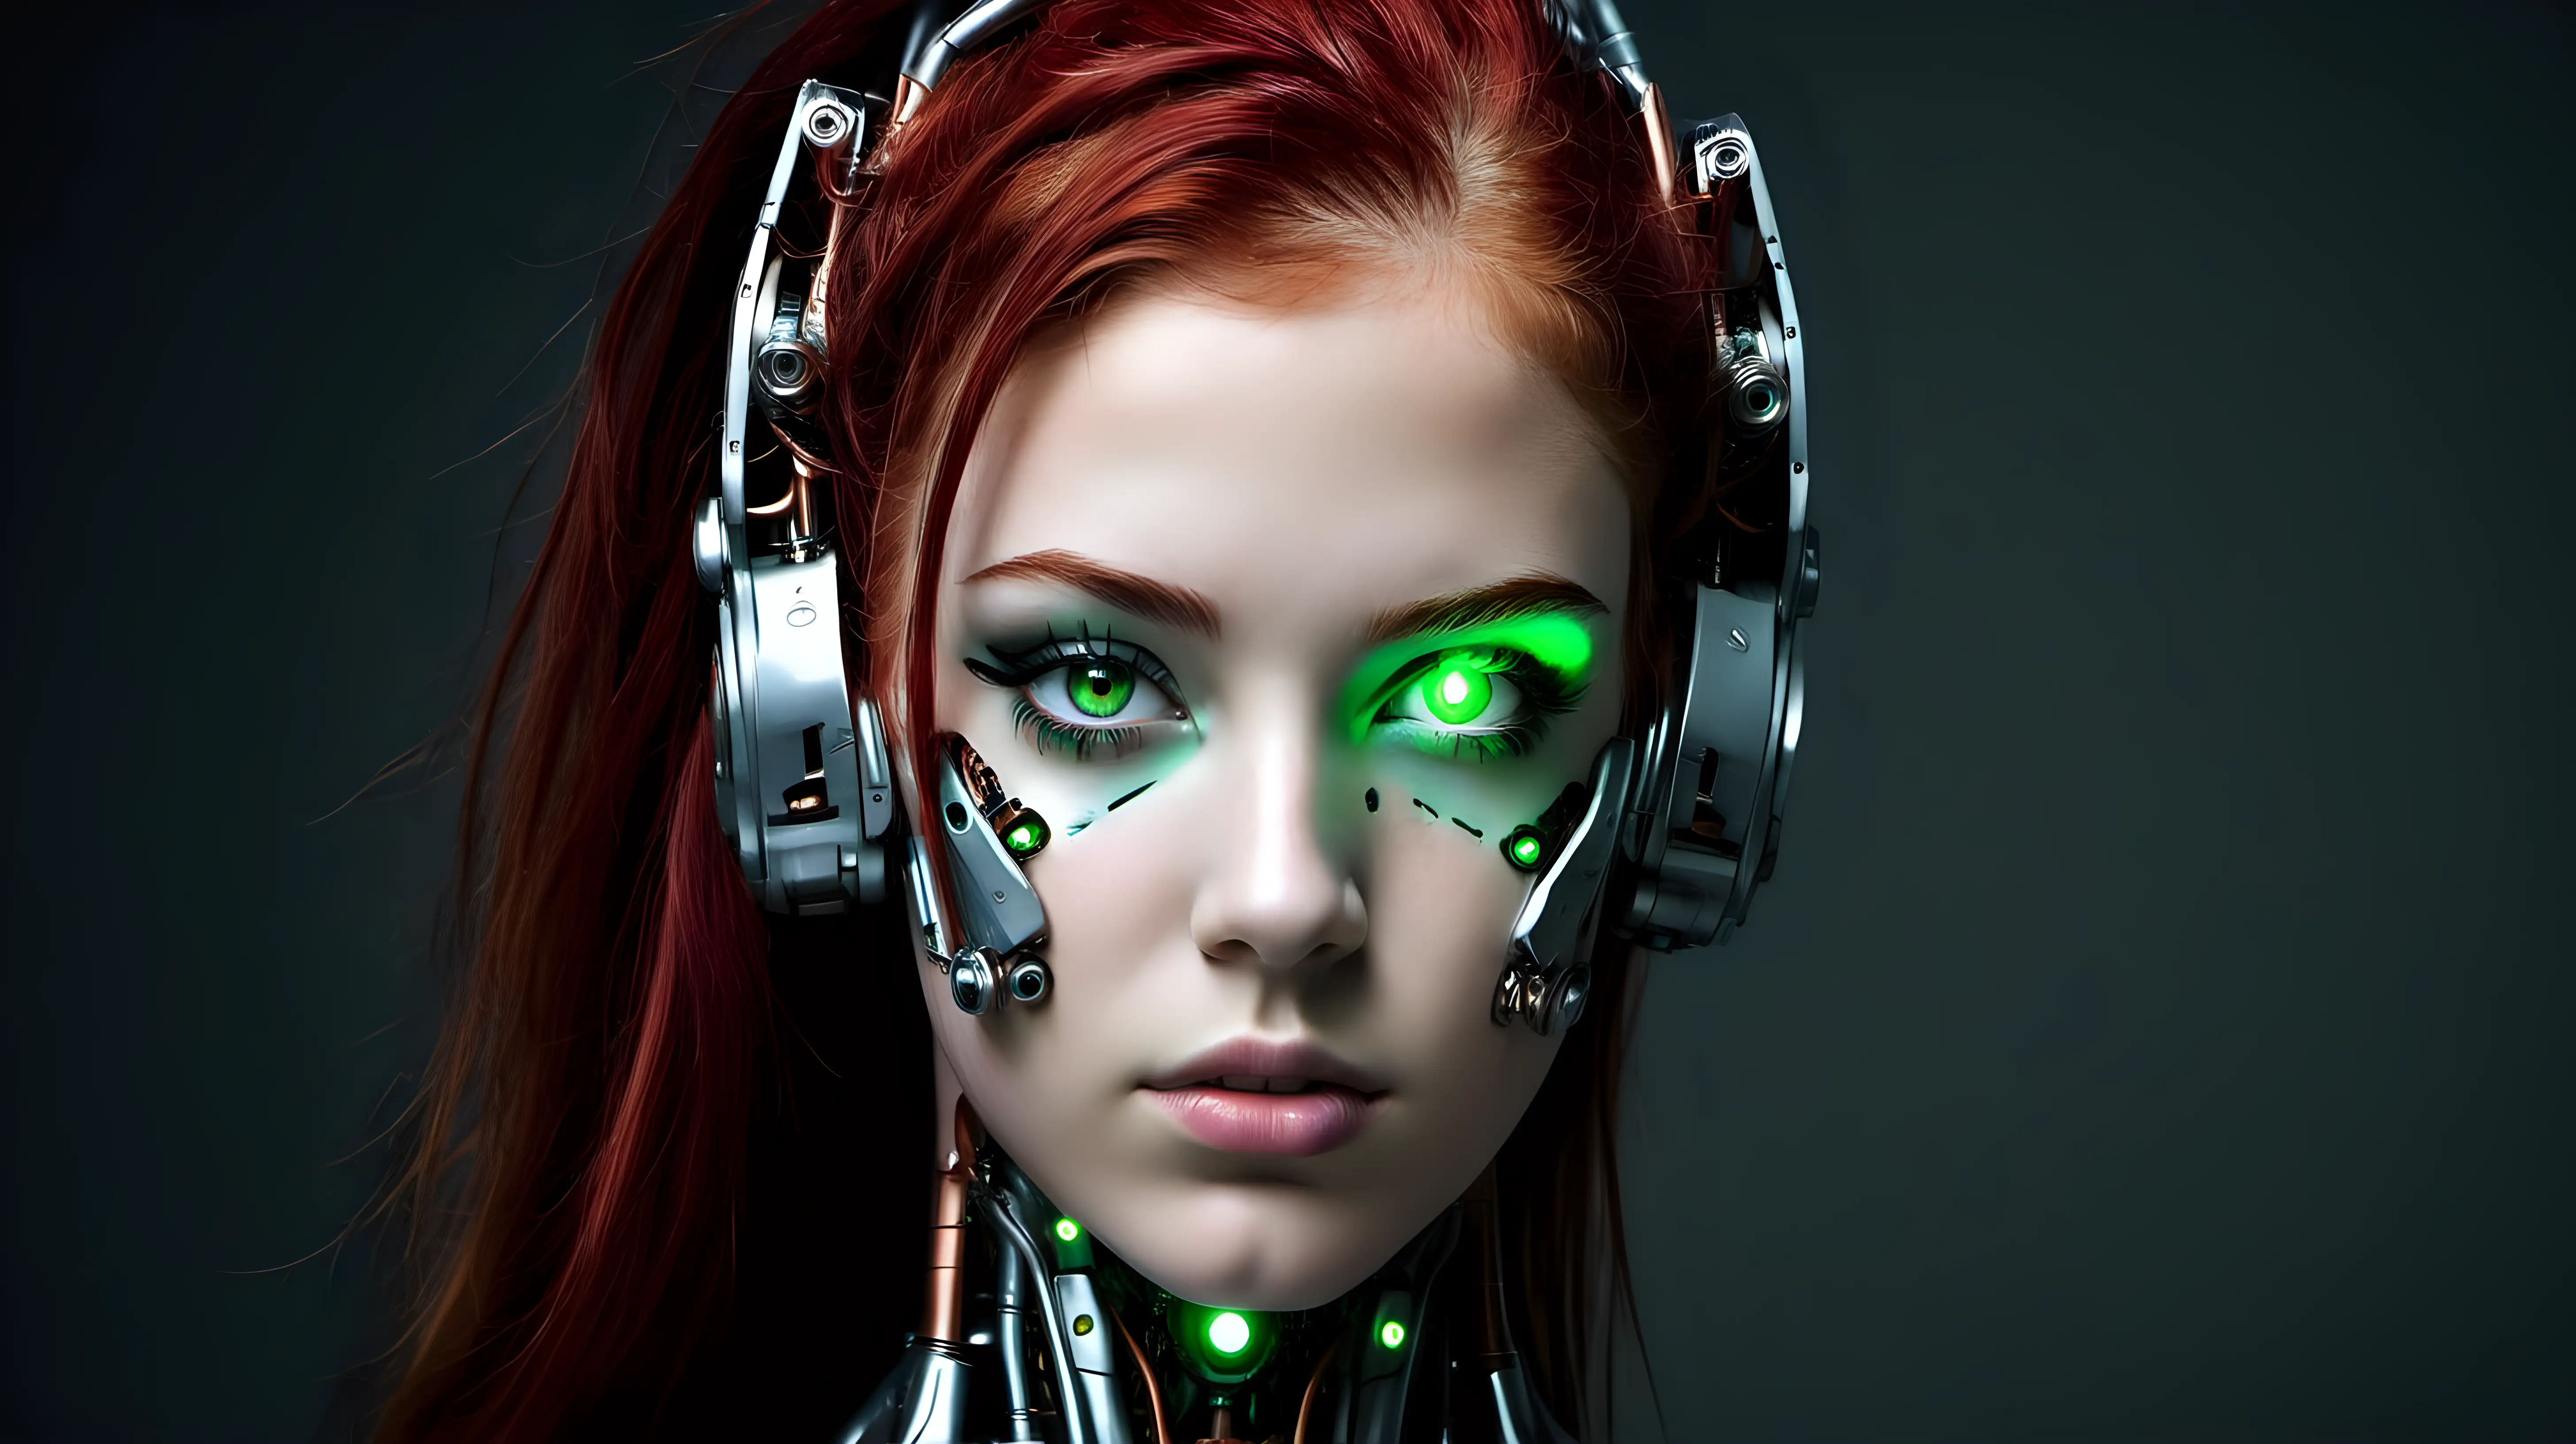 Stunning Cyborg Beauty with Red Hair and Green Eyes